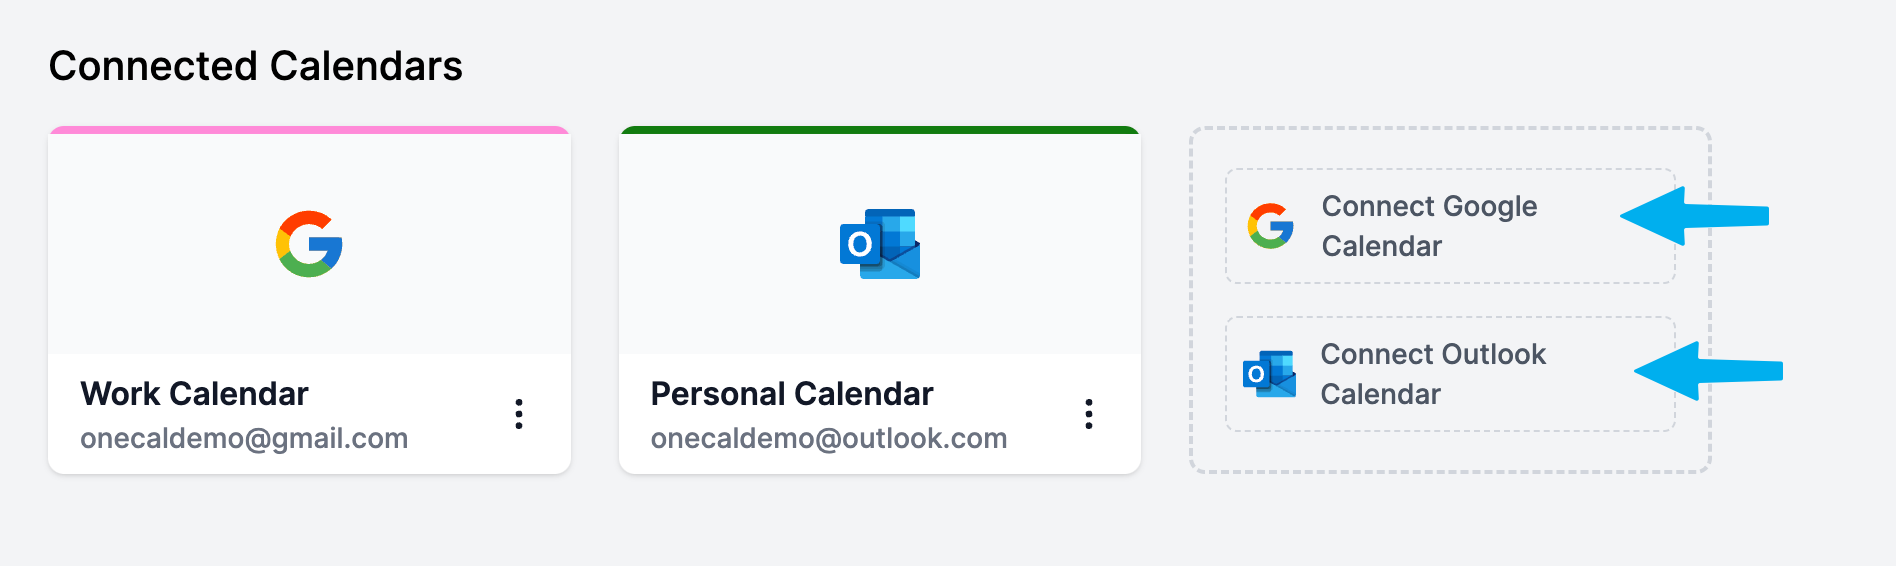 OneCal - Connect calendars UI